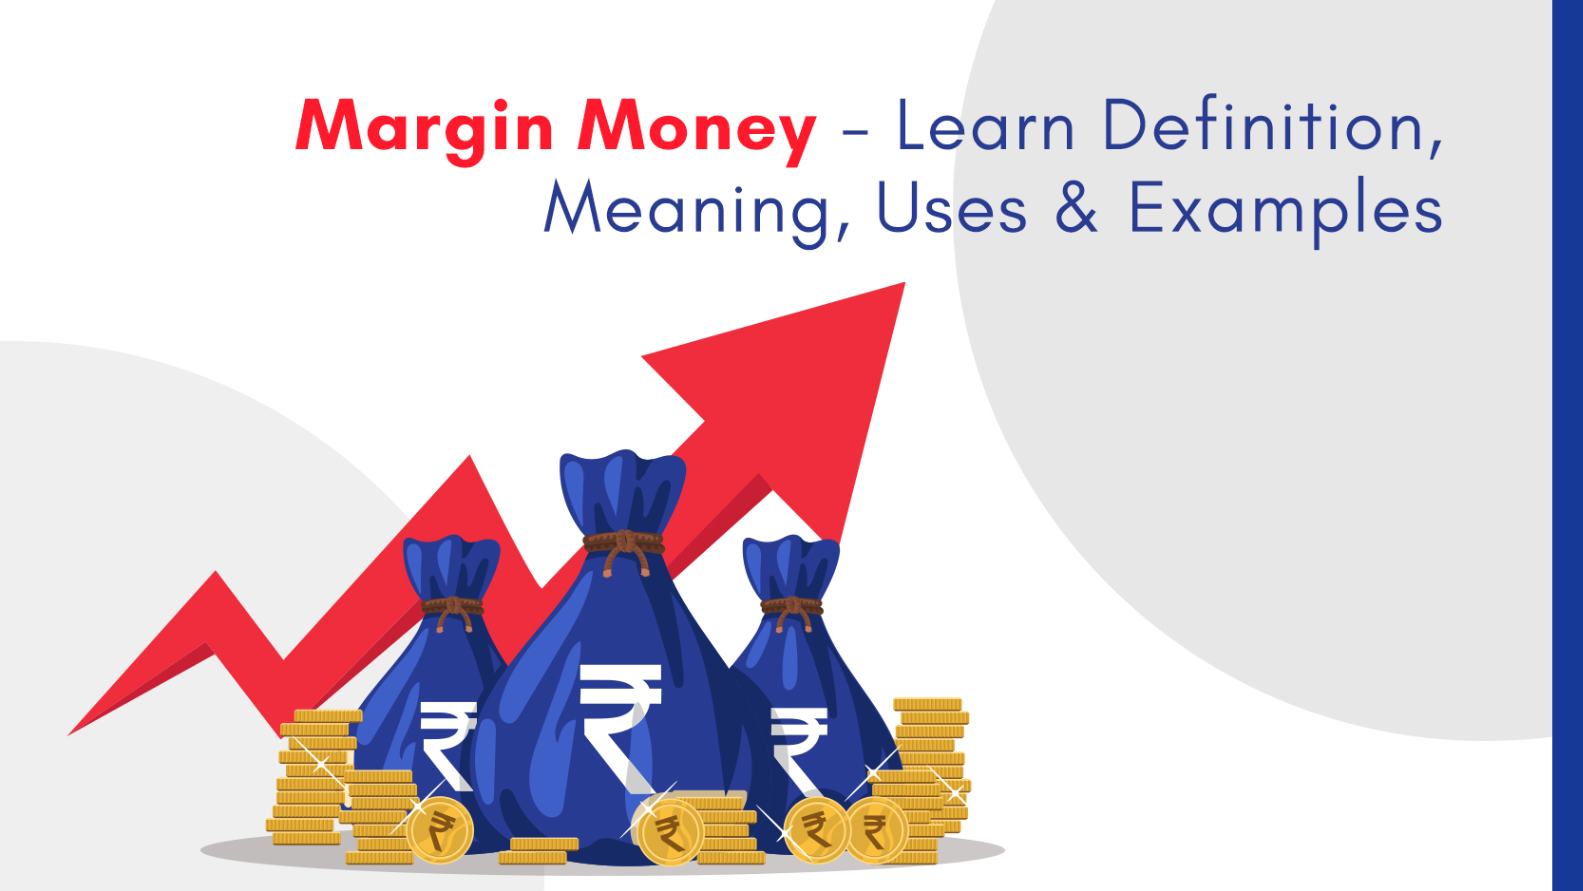 Margin Money - Learn Definition,
Meaning, Uses & Examples